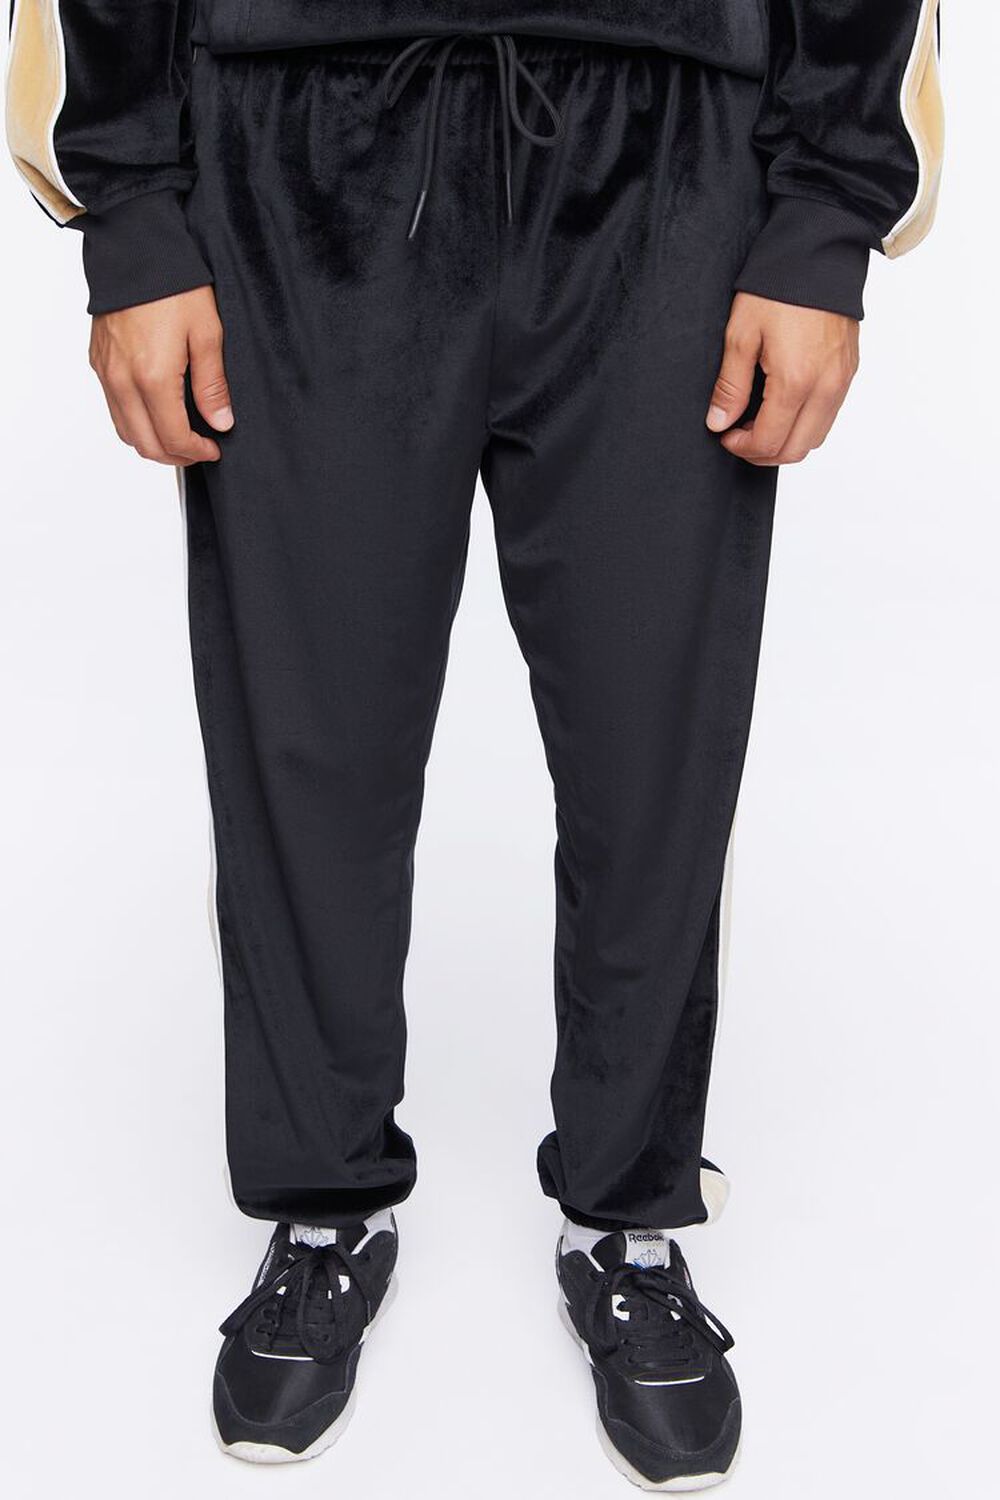 BLACK/BROWN Active Side-Striped Velour Joggers, image 2